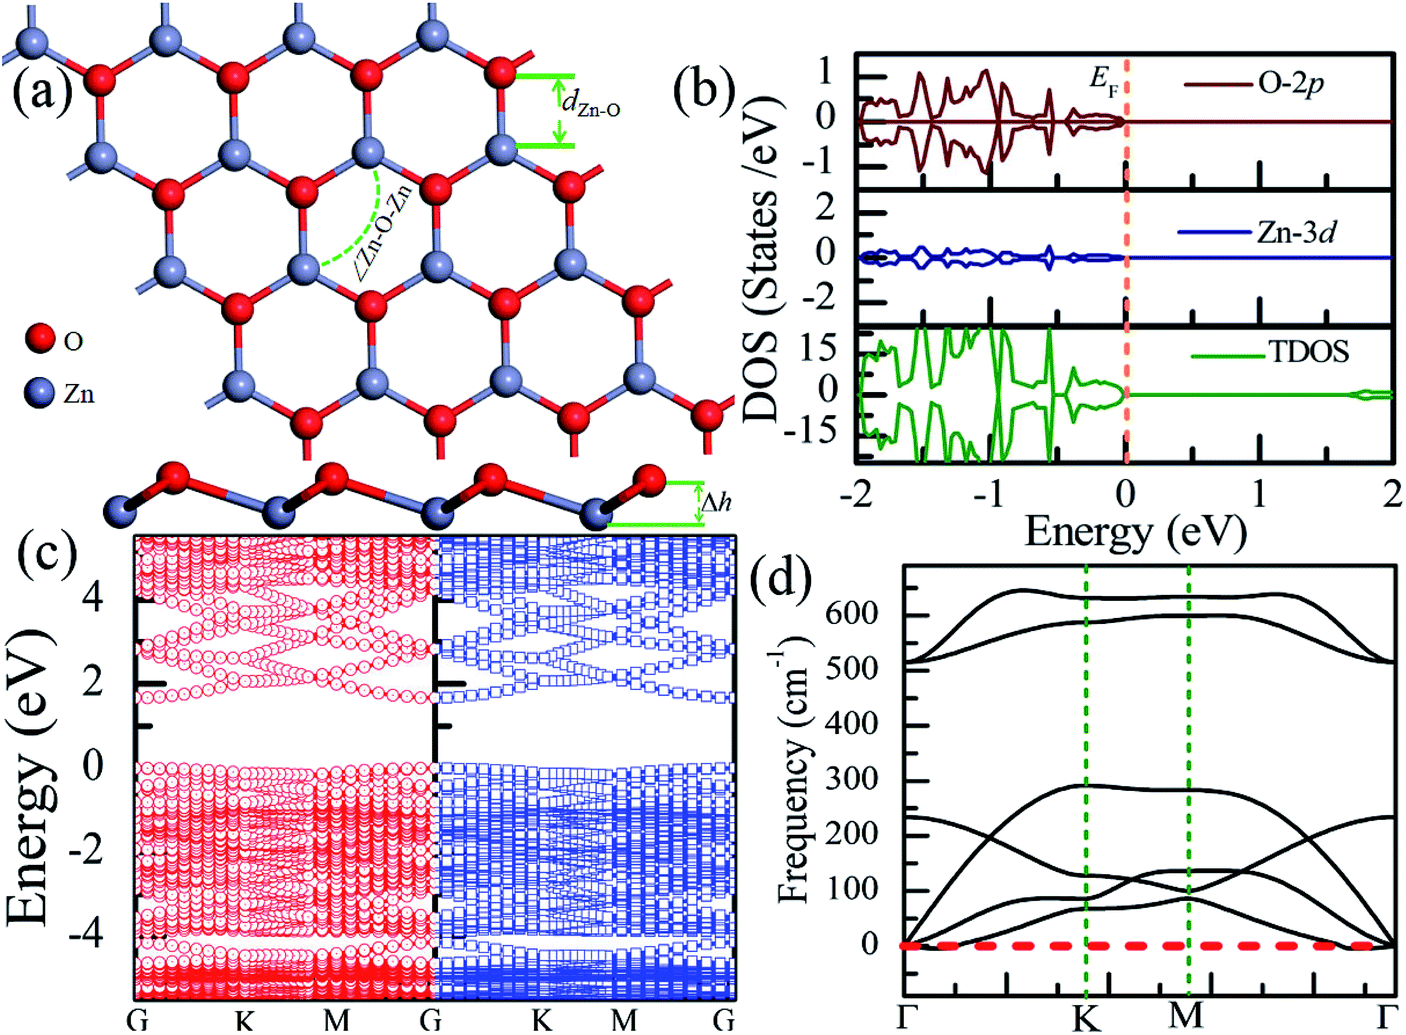 Chemical functionalization of the ZnO monolayer: structural and electronic  properties - RSC Advances (RSC Publishing) DOI:10.1039/C9RA03484F